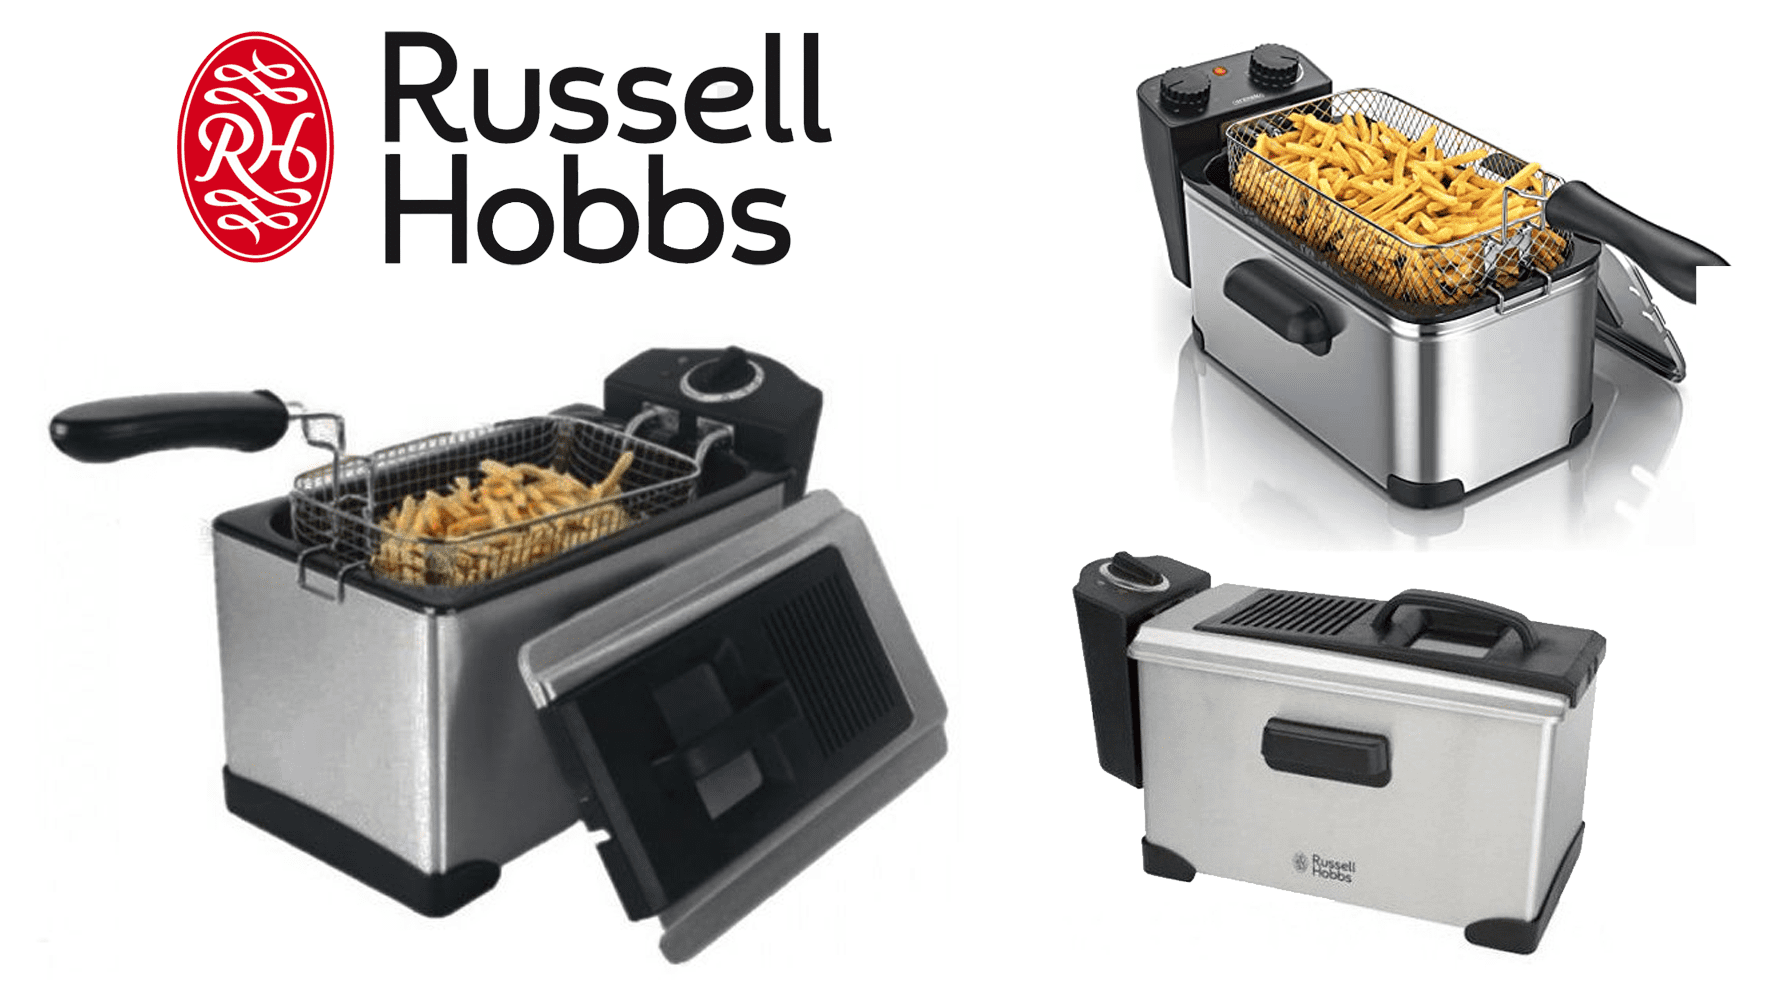 FRITEUSE RUSSELL HOBBS